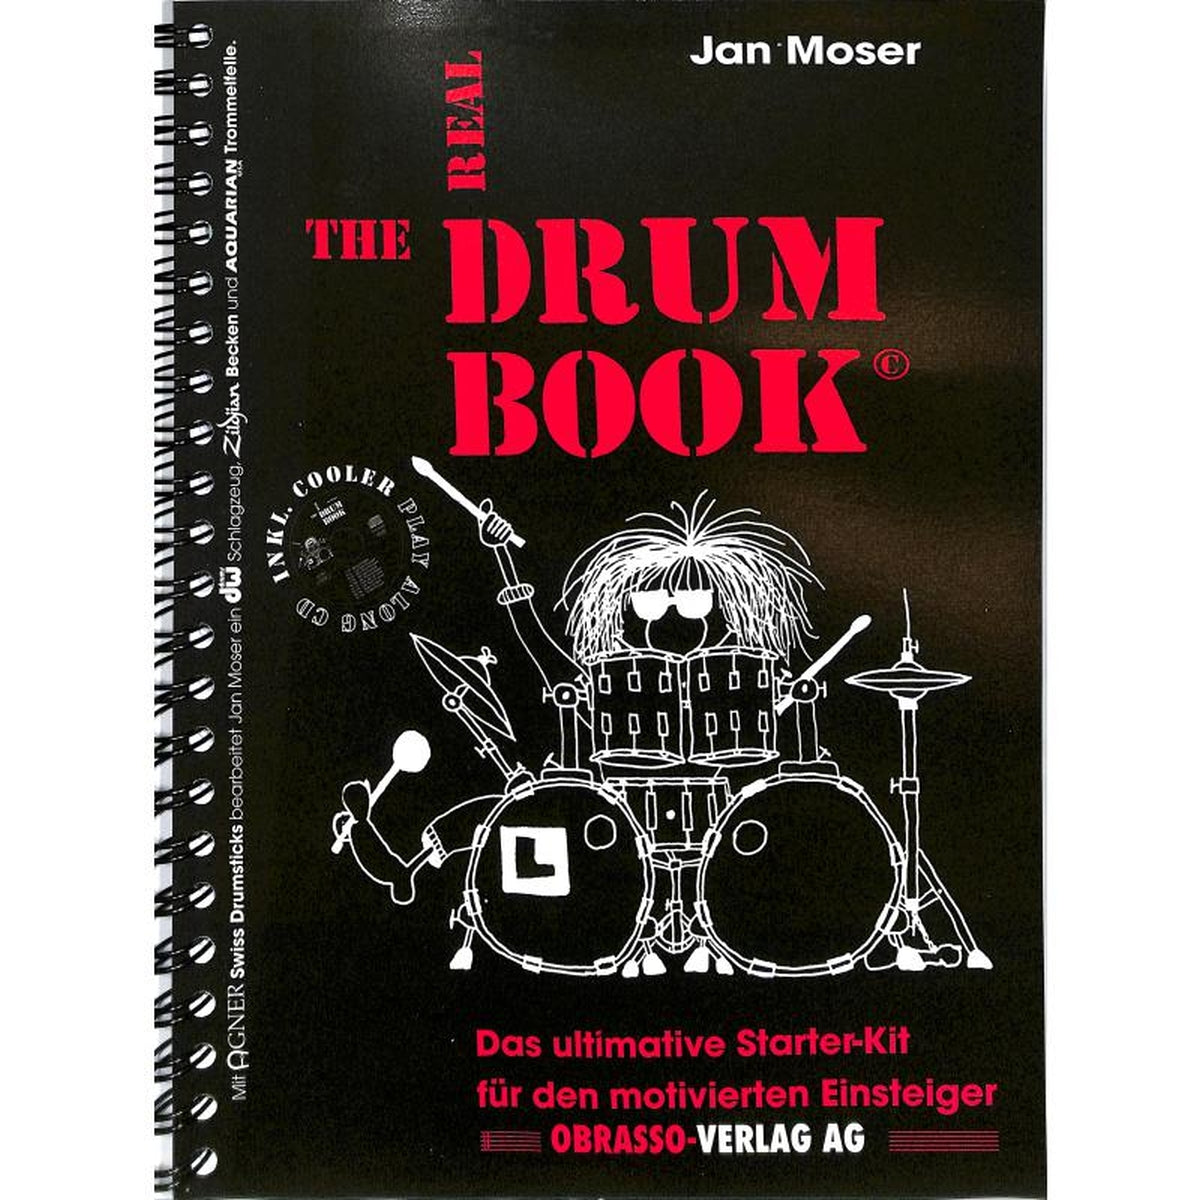 The Real Drumbook - Jan Moser